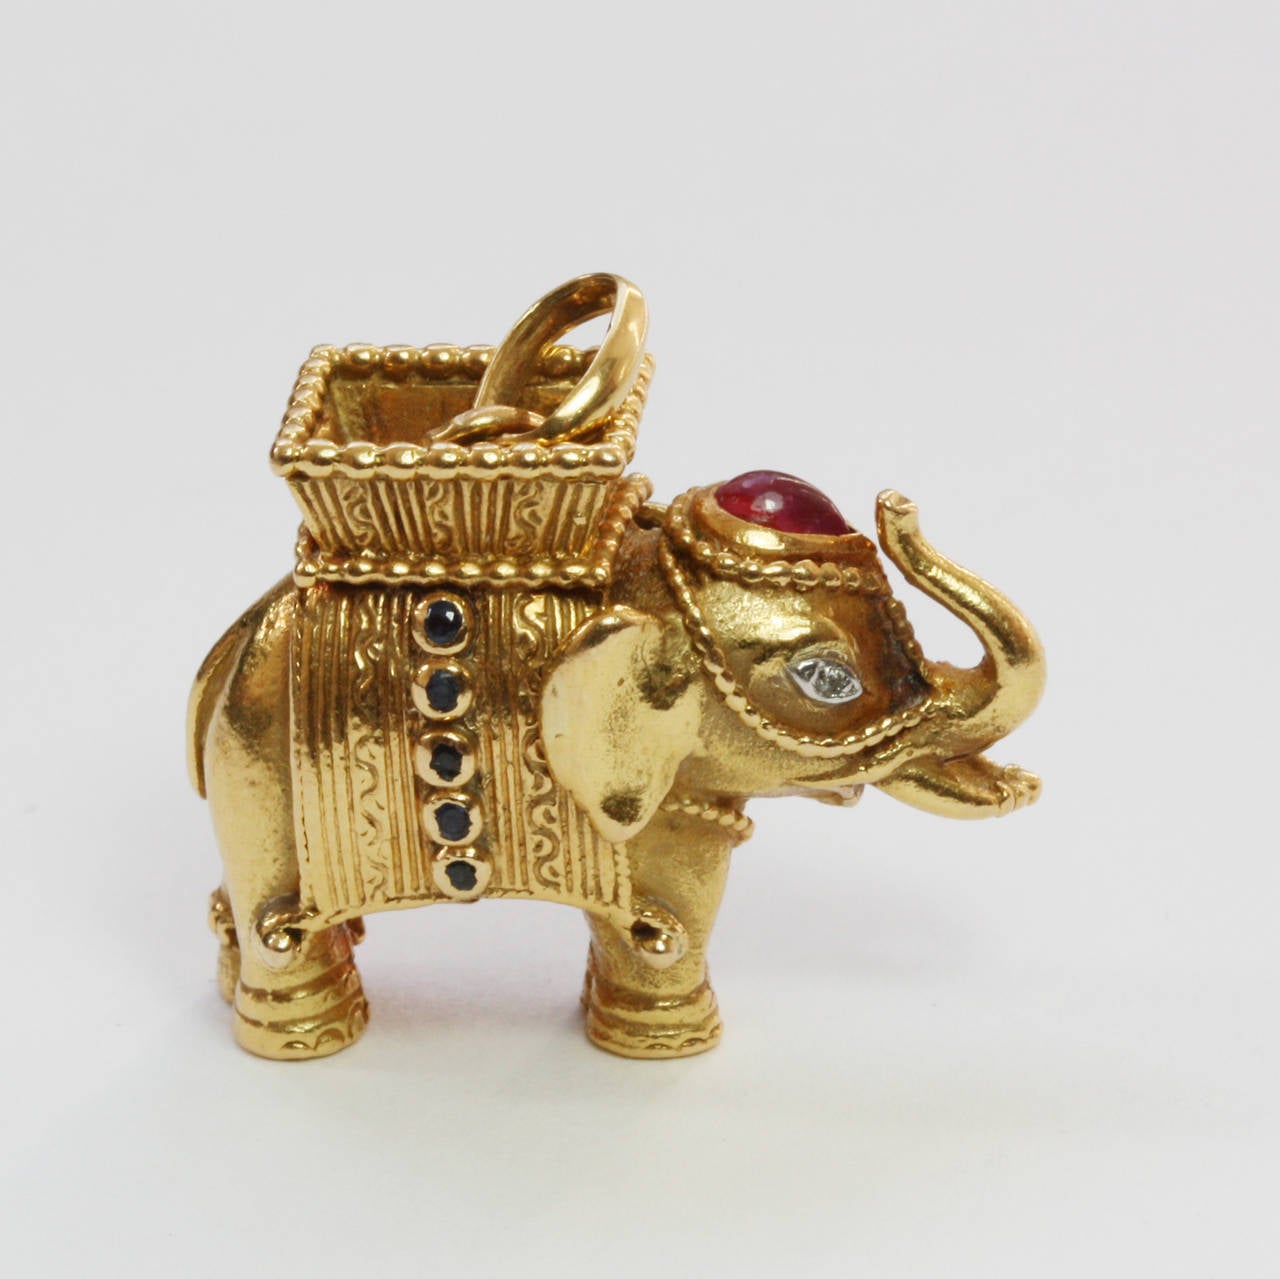 A French 18 carat gold elephant luck charm with a basket on its back that is called a Howdah, or Houdah, which literally means ‘bed carried by a camel’. This kind of seat was used to convey wealthy individuals parading or hunting, in wartime or